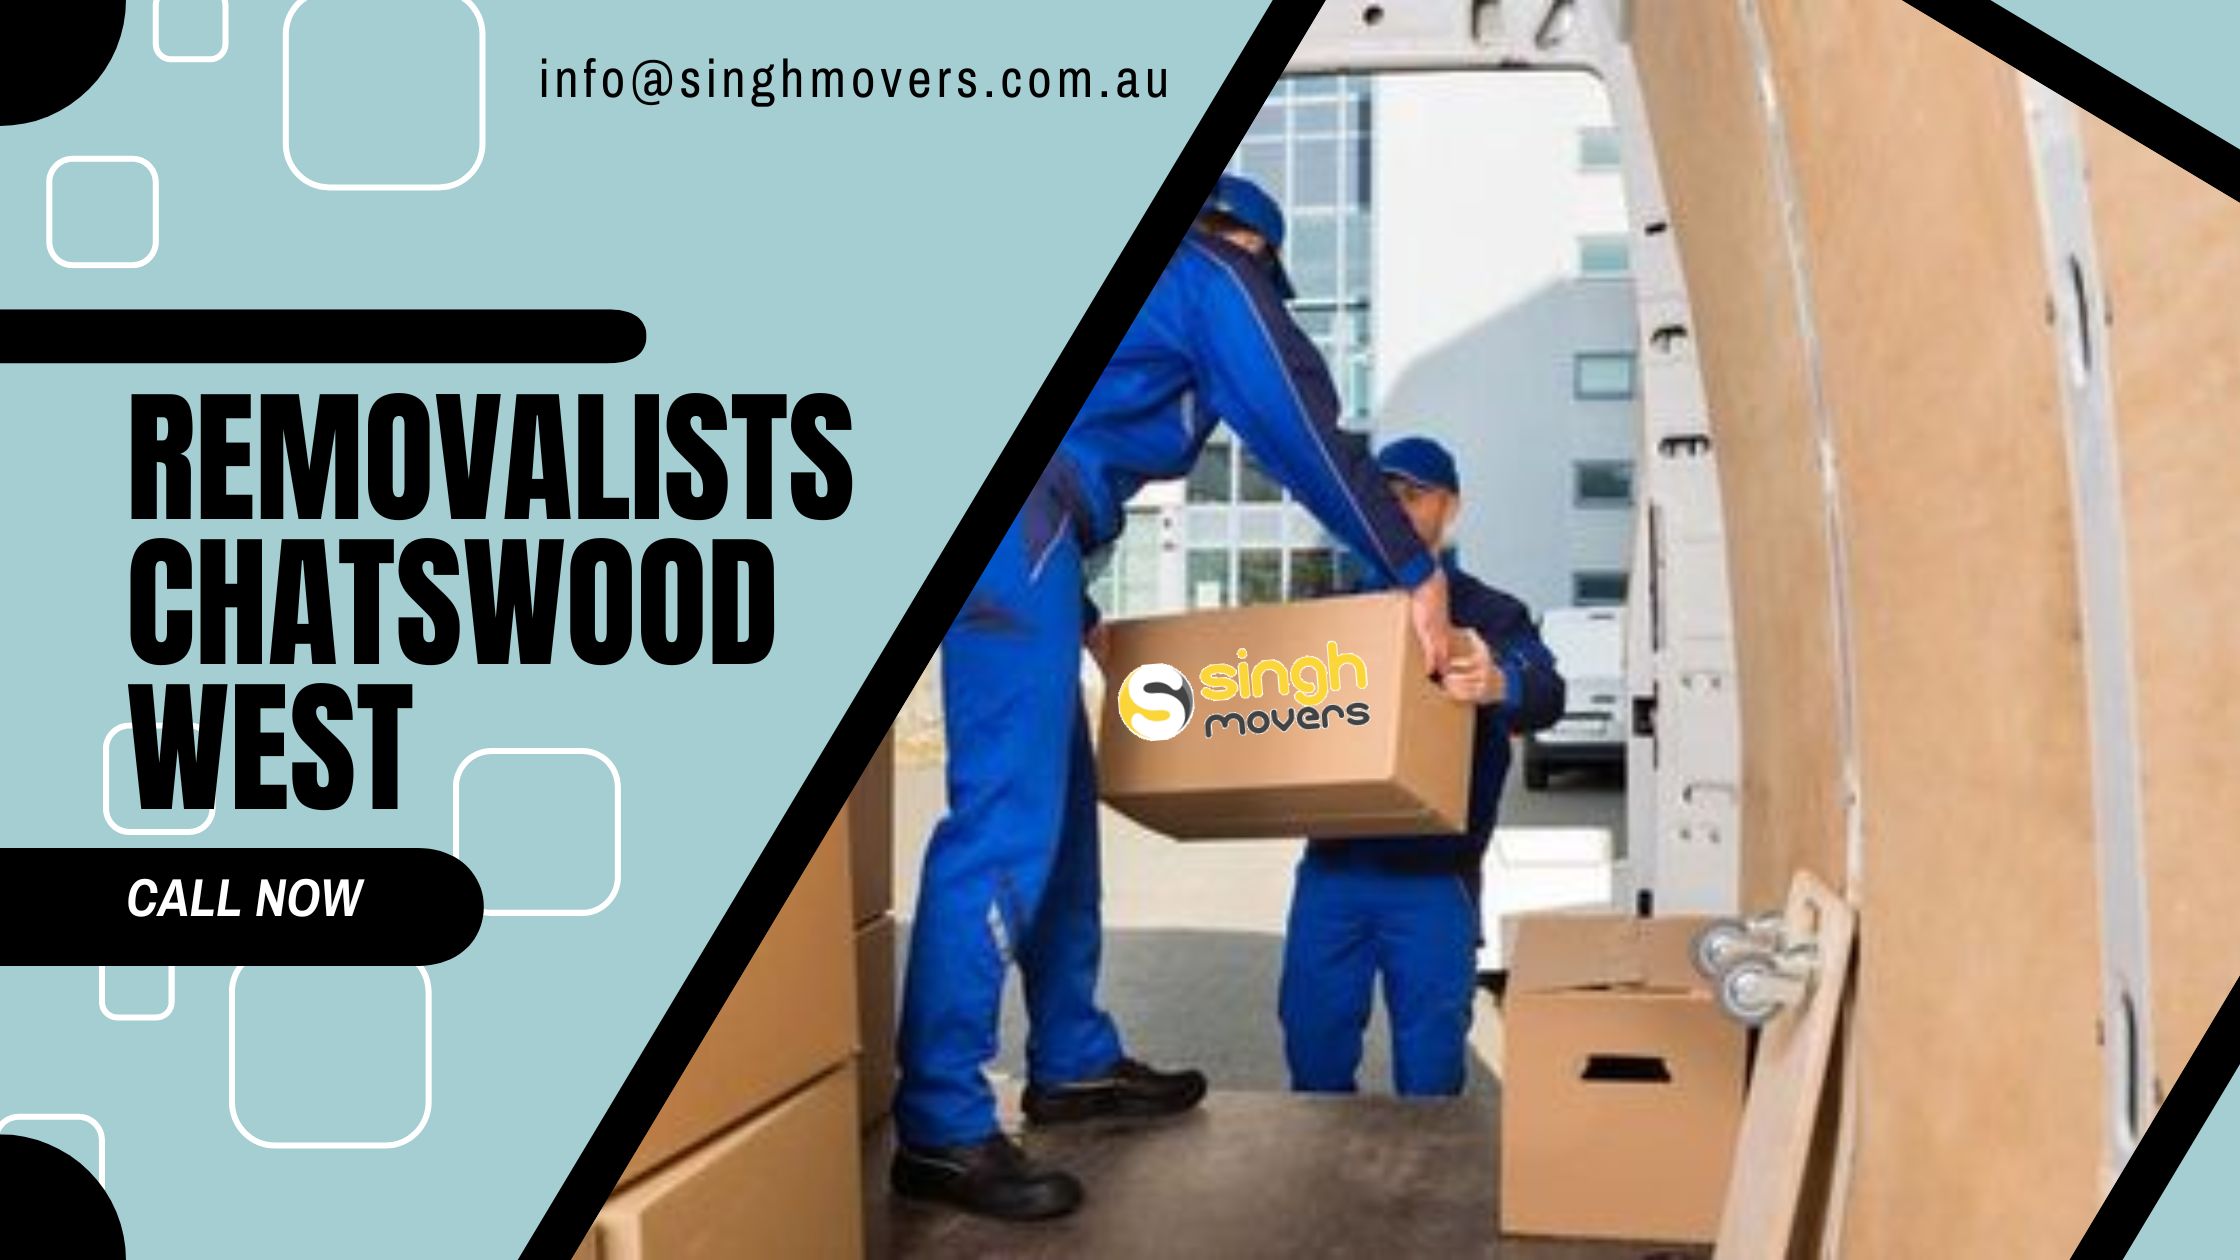 Removalists Chatswood West